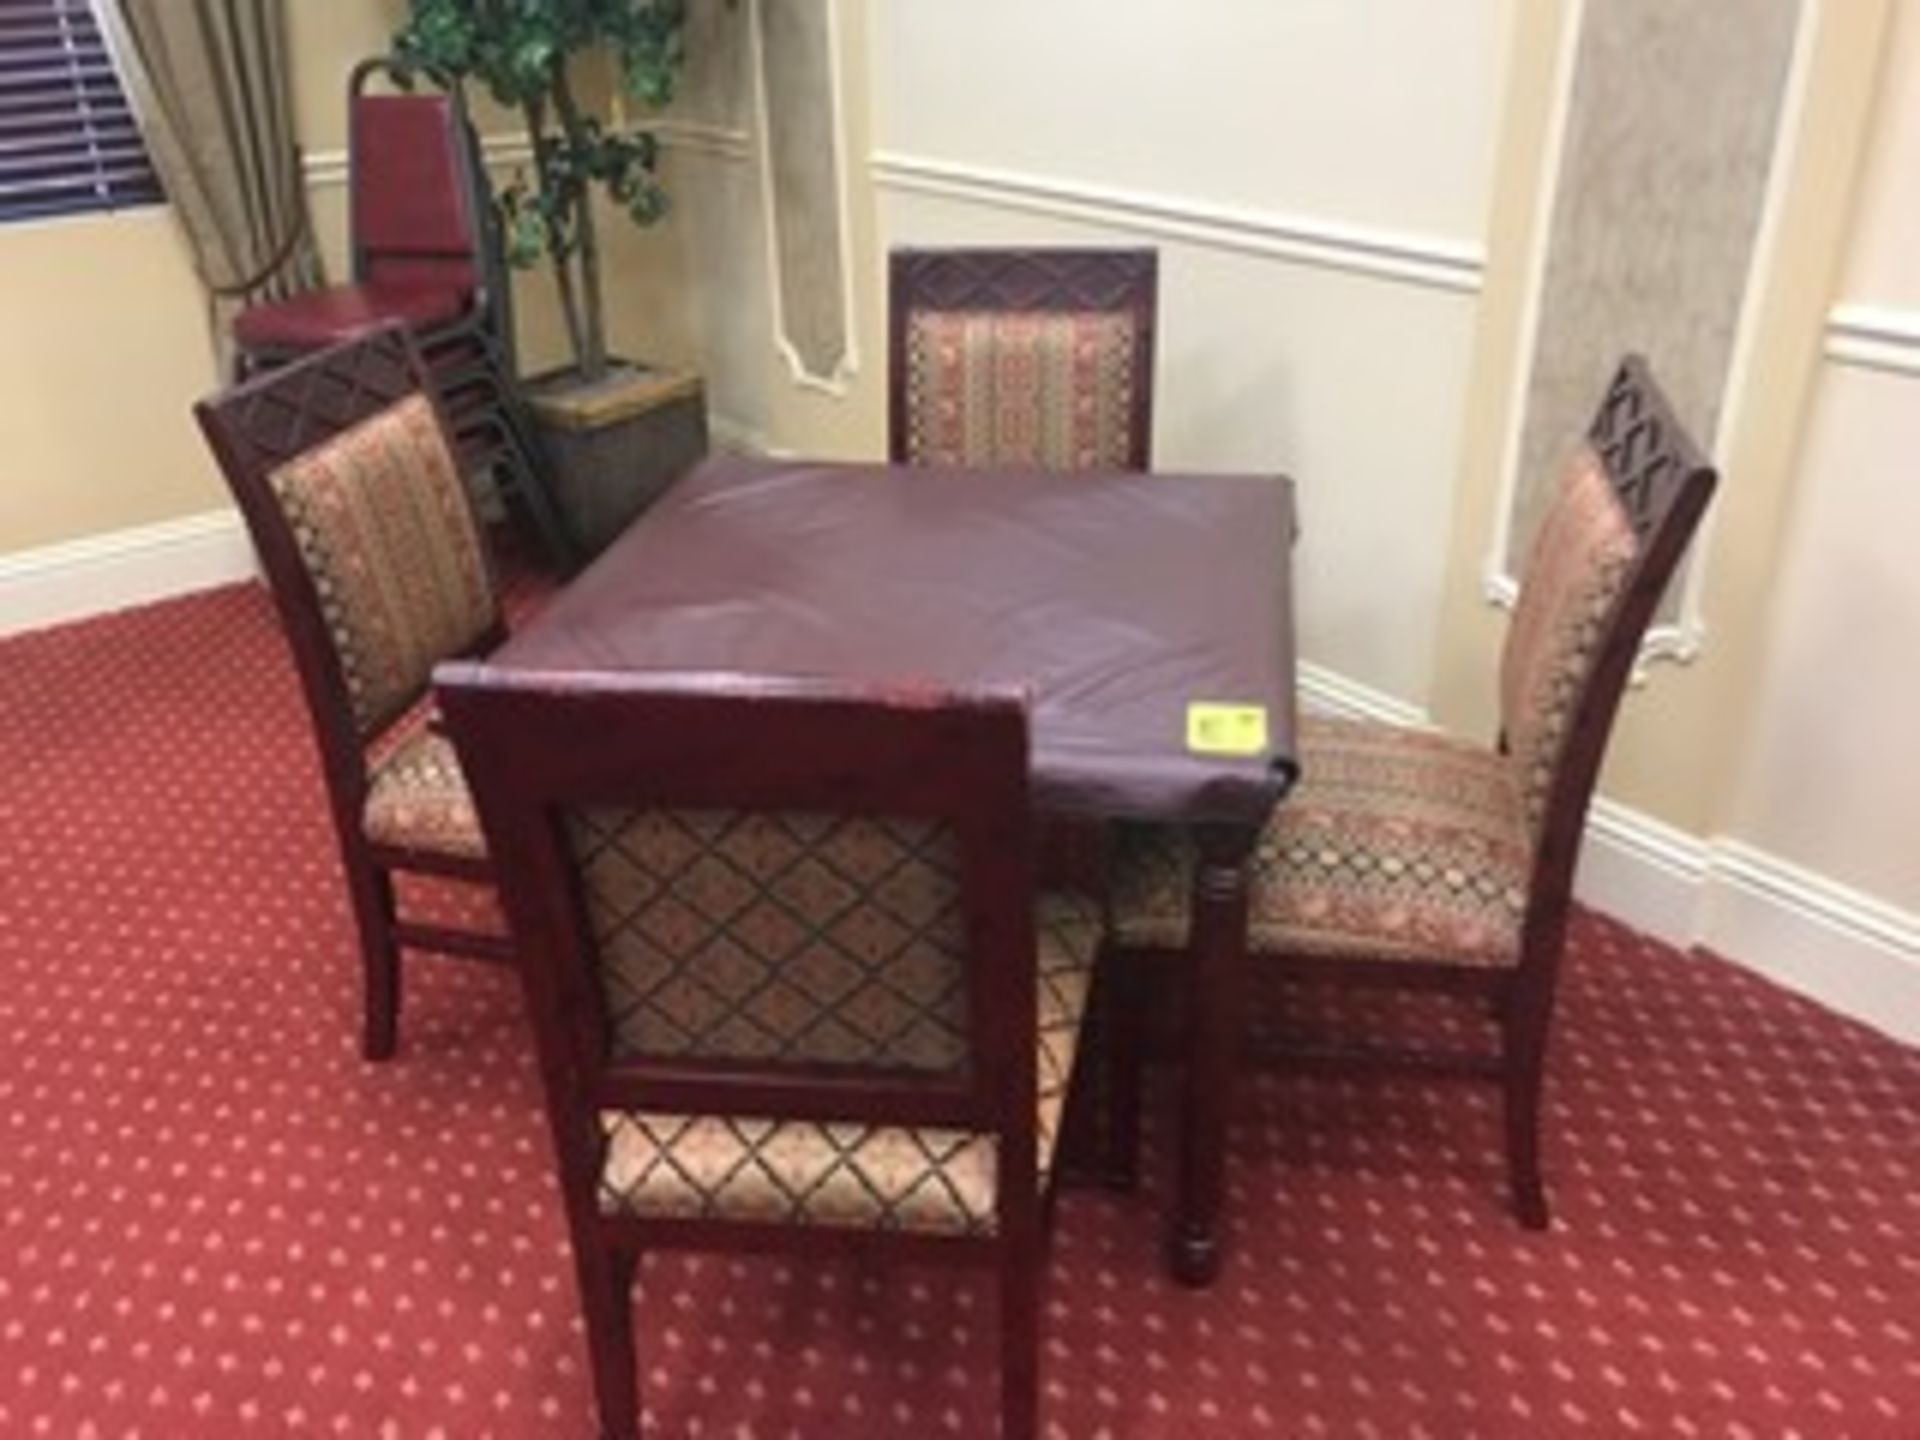 5-PIECE CARD TABLE SET WITH TABLE COVER - 1 TABLE / 4 CHAIRS - 36'' x 36''